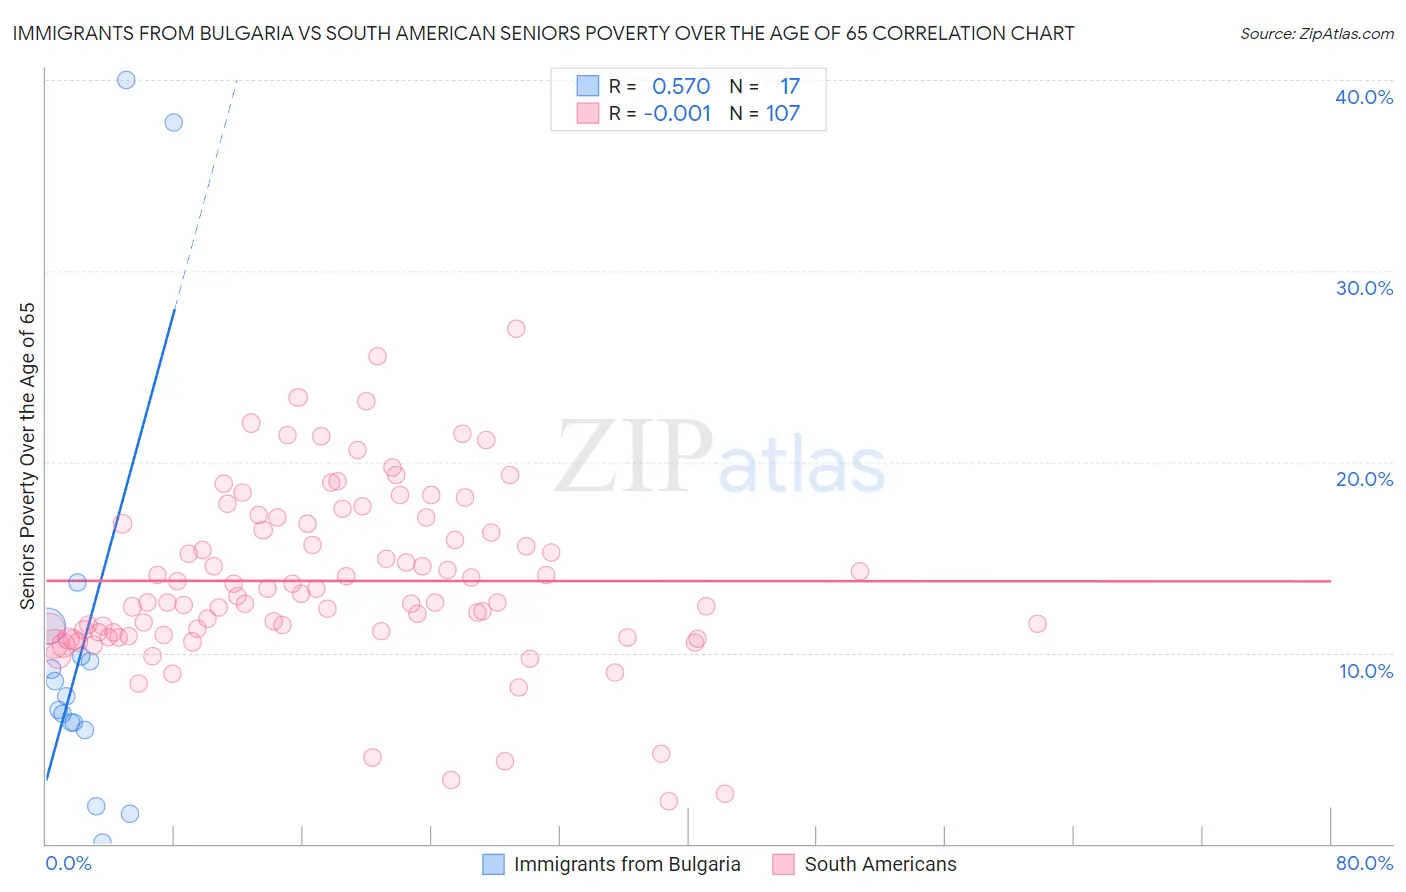 Immigrants from Bulgaria vs South American Seniors Poverty Over the Age of 65